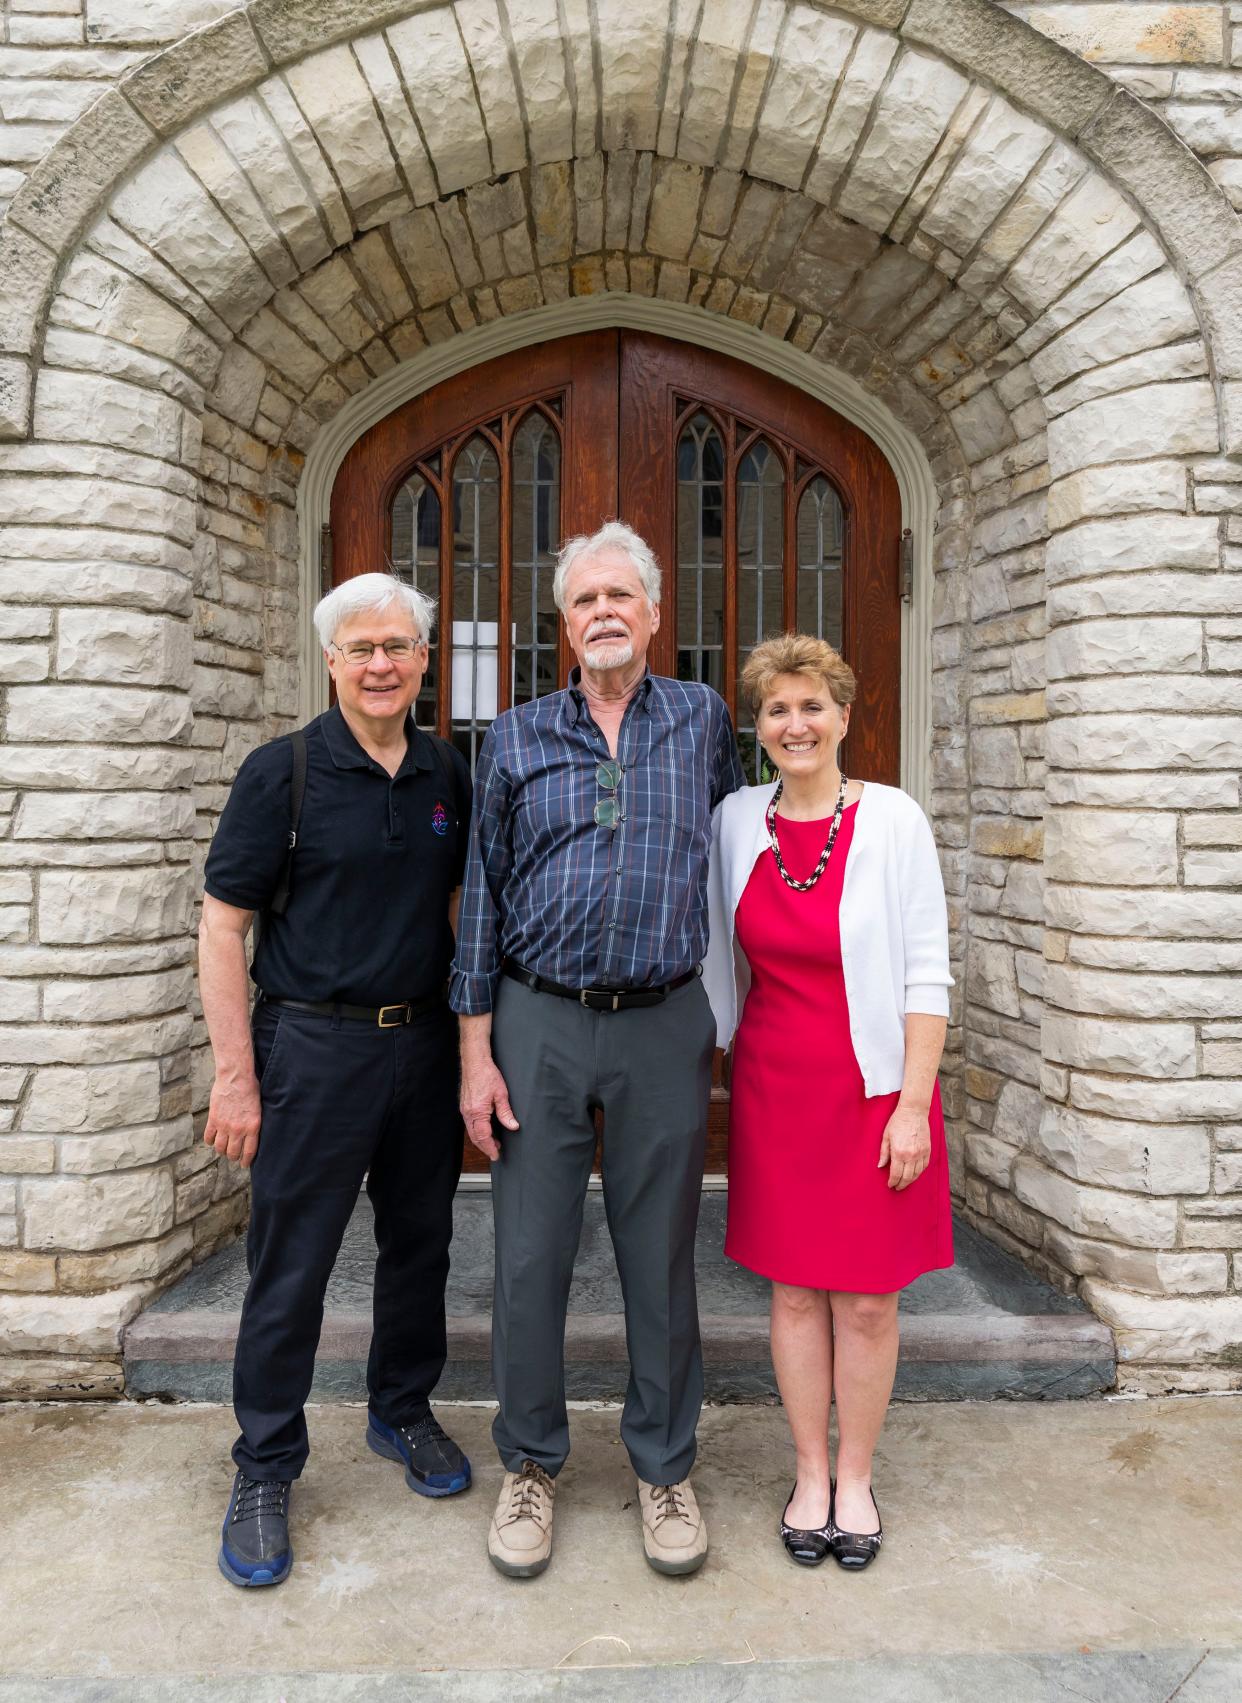 The Rev. Don Francis, left, board member Travers Price and board Chairperson Wendy Kamerling are pictured outside Wauwatosa Avenue United Methodist Church on Friday, May 20, 2022. The congregation is celebrating its 175th anniversary this month. The church is the oldest in Wauwatosa and one of the oldest in the state.